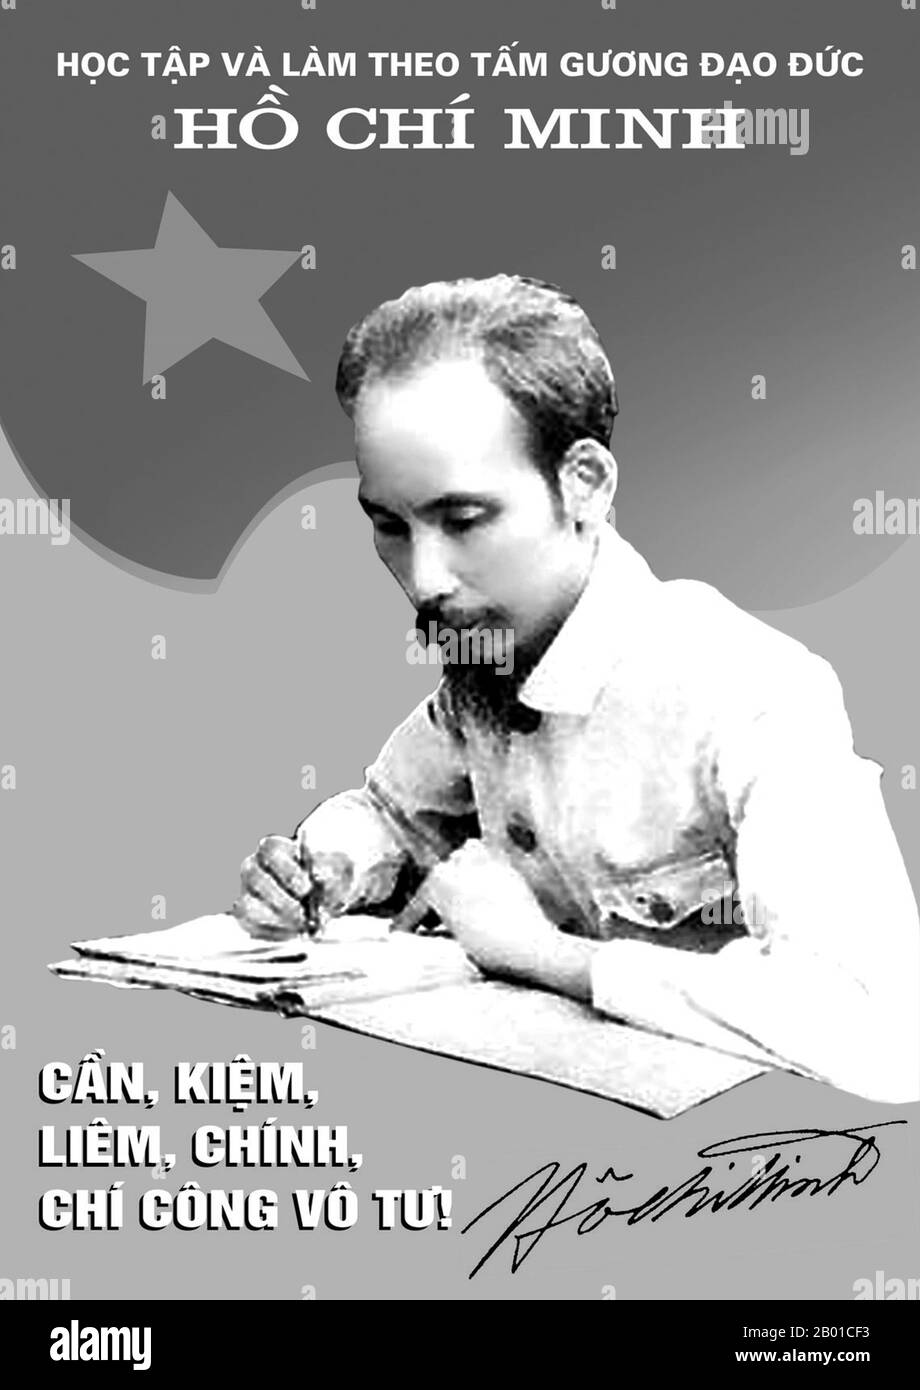 Vietnam: Communist propaganda poster - Study and Follow the Example of Ho Chi Minh: Thrift, Efficiency, Honesty, Righteousness and Public Mindedness!  Hồ Chí Minh (19 May 1890 - 3 September 1969), born Nguyễn Sinh Cung and also known as Nguyễn Ái Quốc, was a Vietnamese Communist revolutionary leader who was prime minister (1946-1955) and president (1945-1969) of the Democratic Republic of Vietnam (North Vietnam).  He formed the Democratic Republic of Vietnam and led the Viet Cong during the Vietnam War until his death. Stock Photo